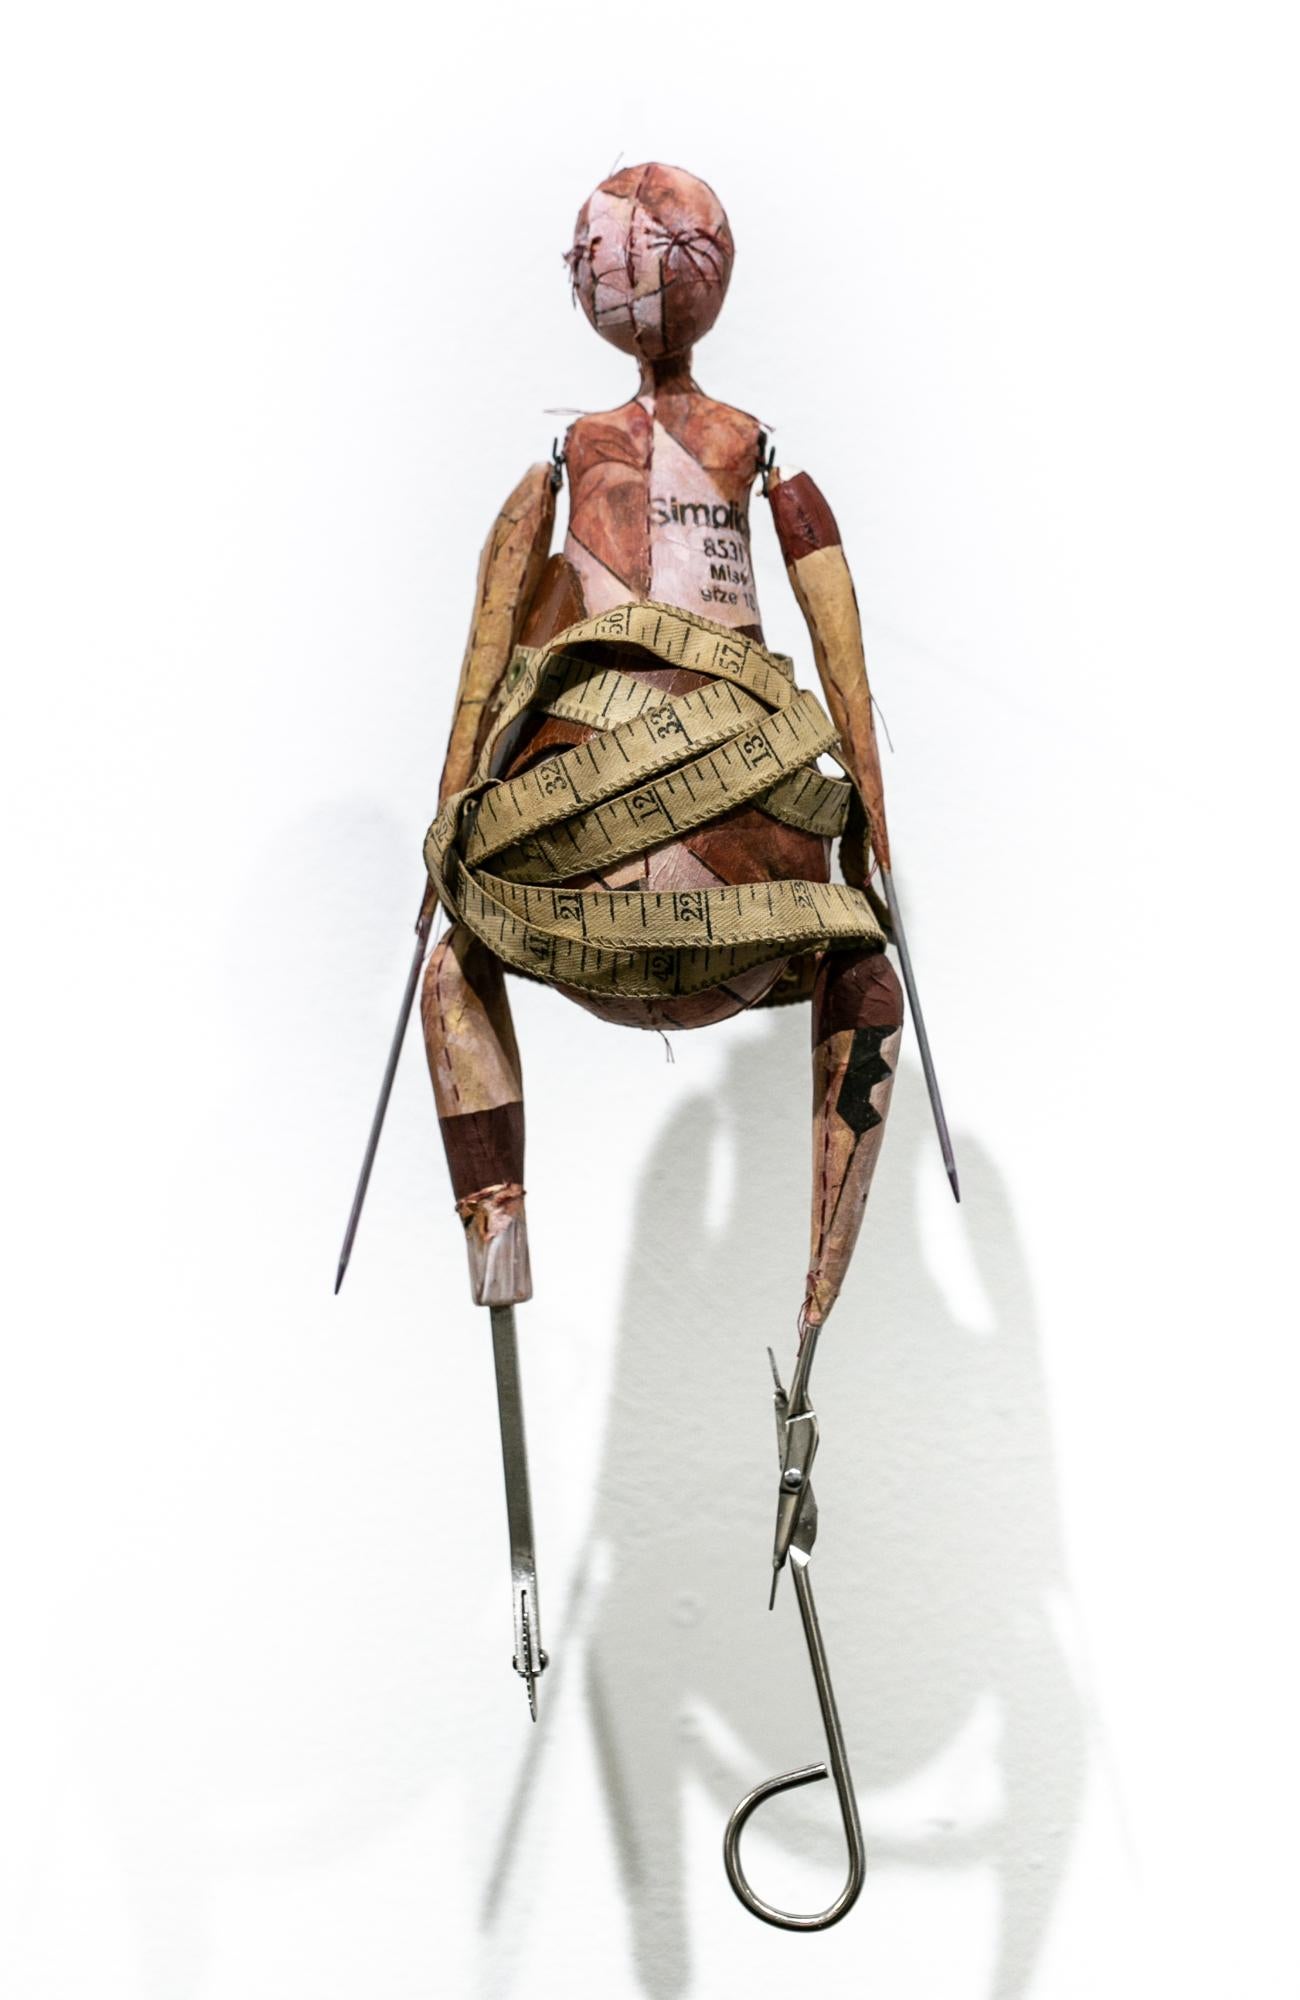 Nicole Havekost Figurative Sculpture - "Measuring Tape", Wall-Hanging Sculpture, Assemblage, Mixed Media